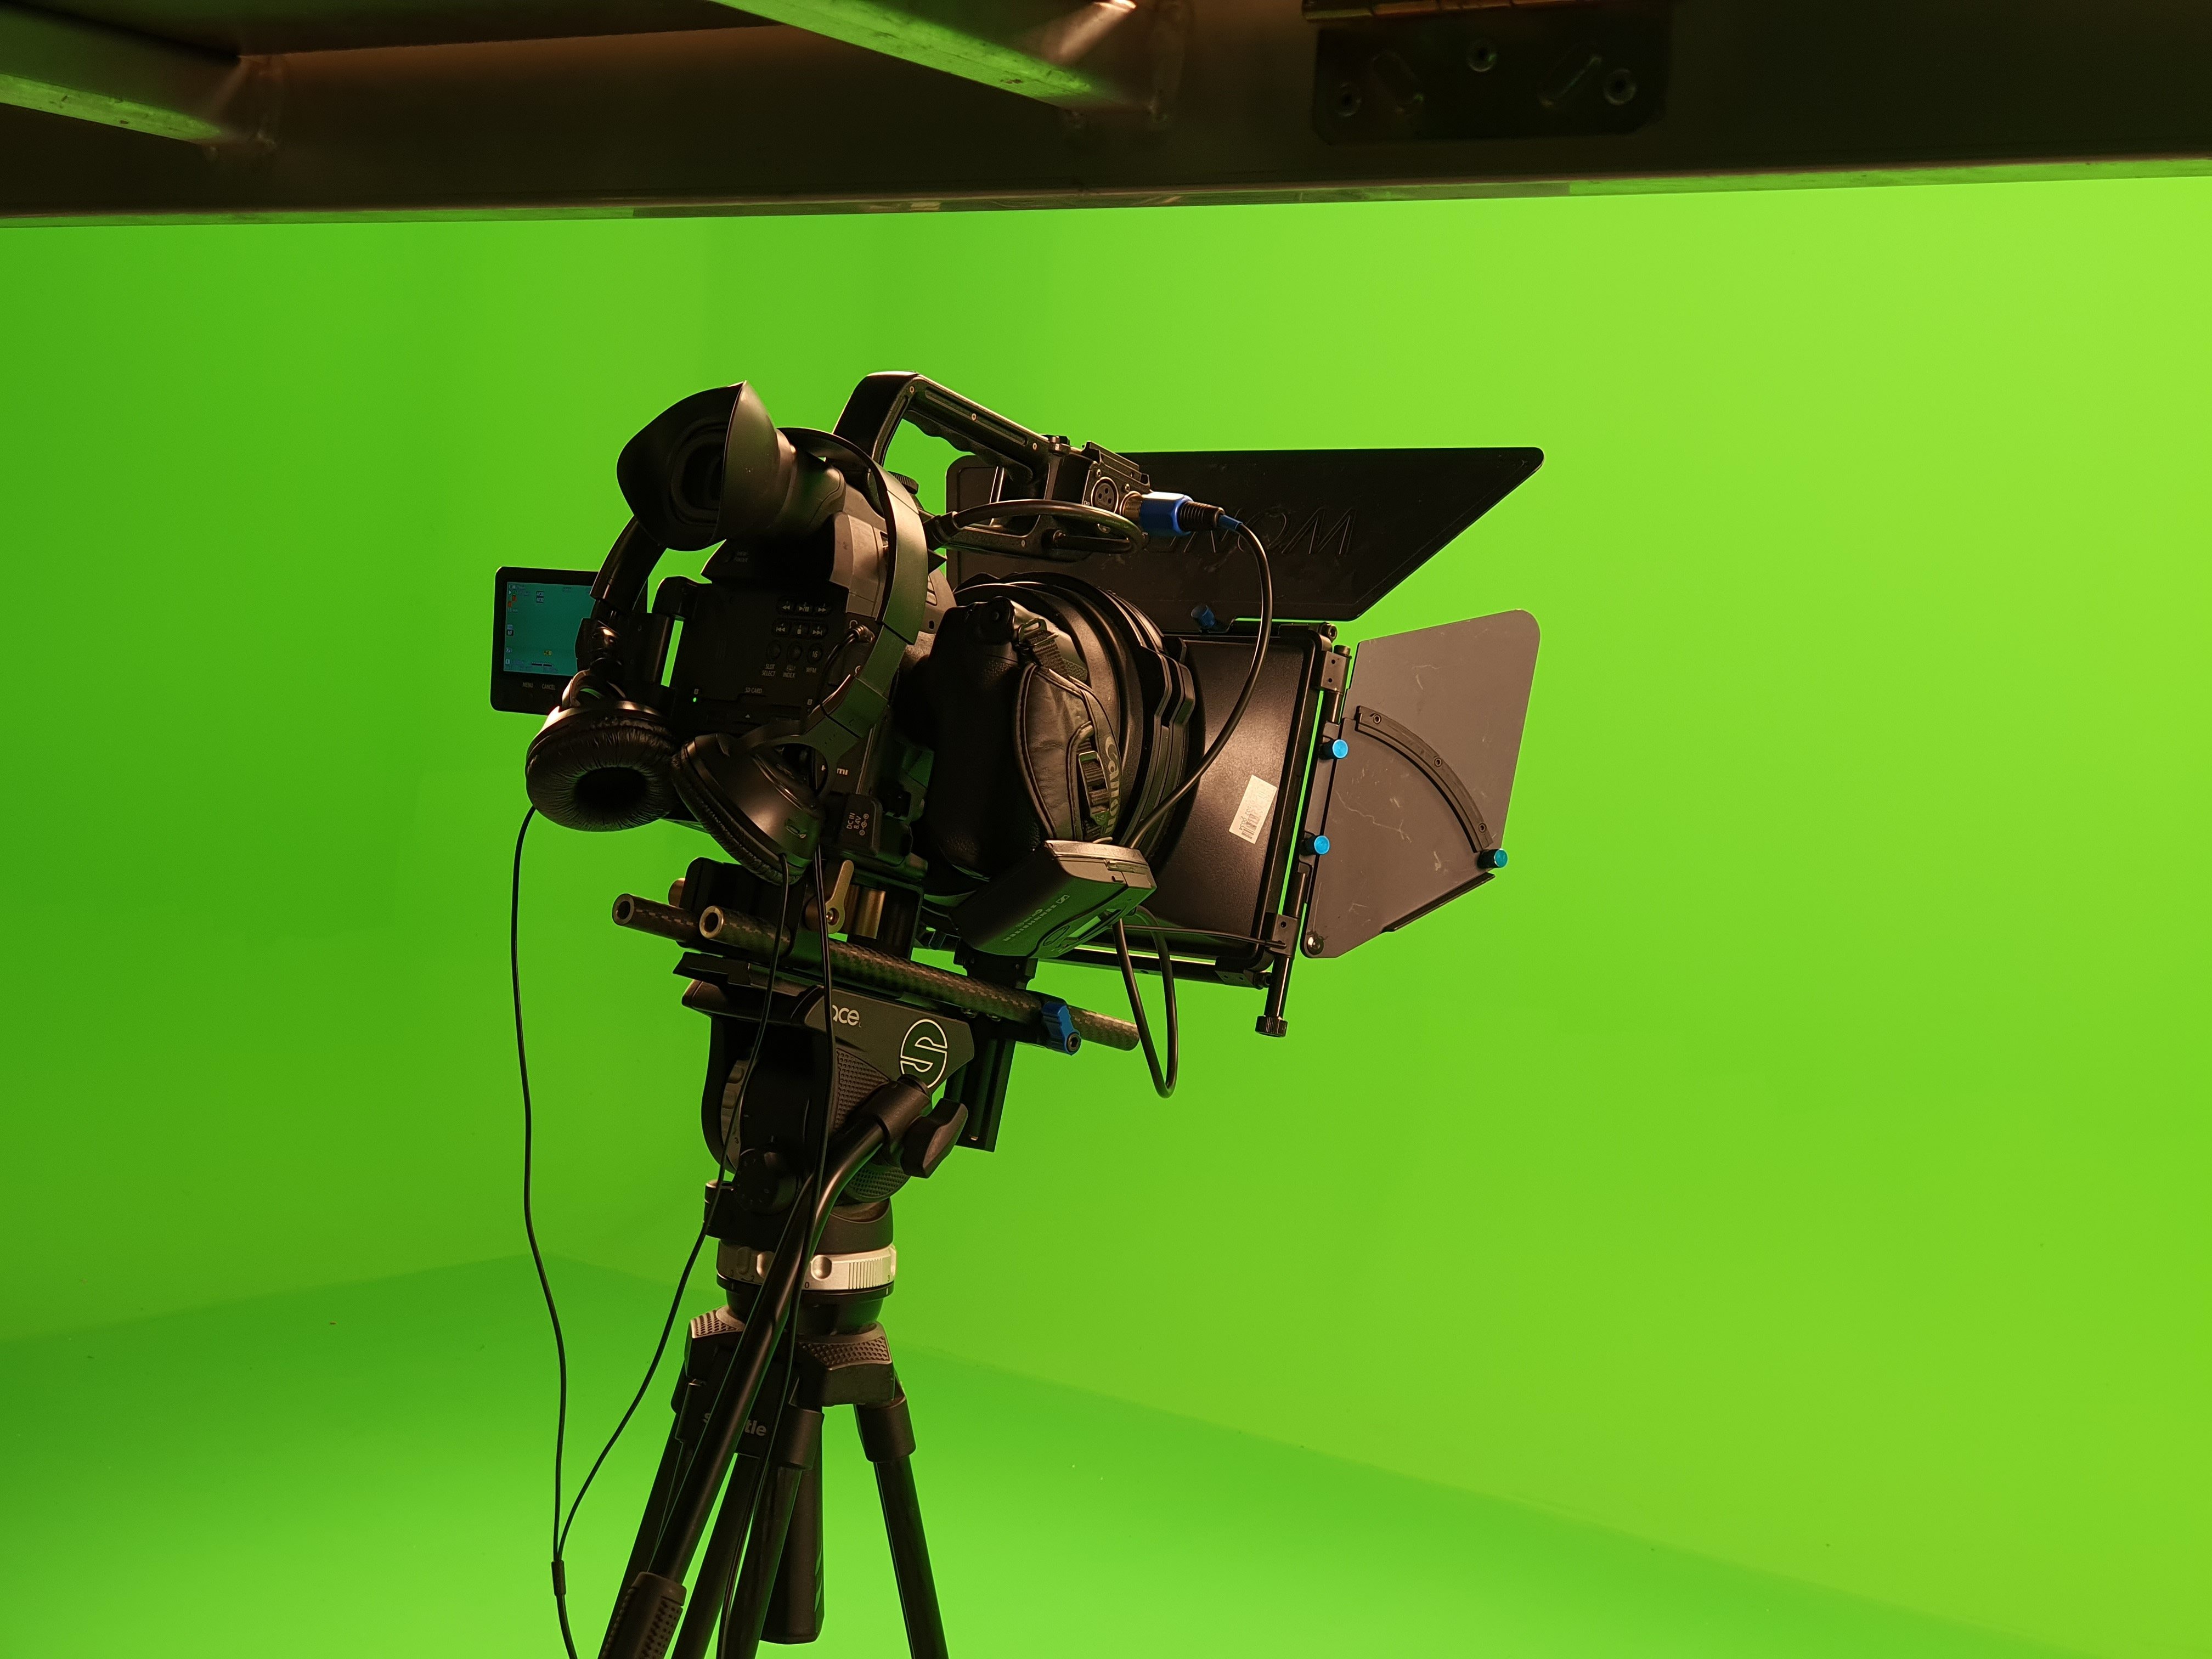 What Equipment Is Needed For A Green Screen?